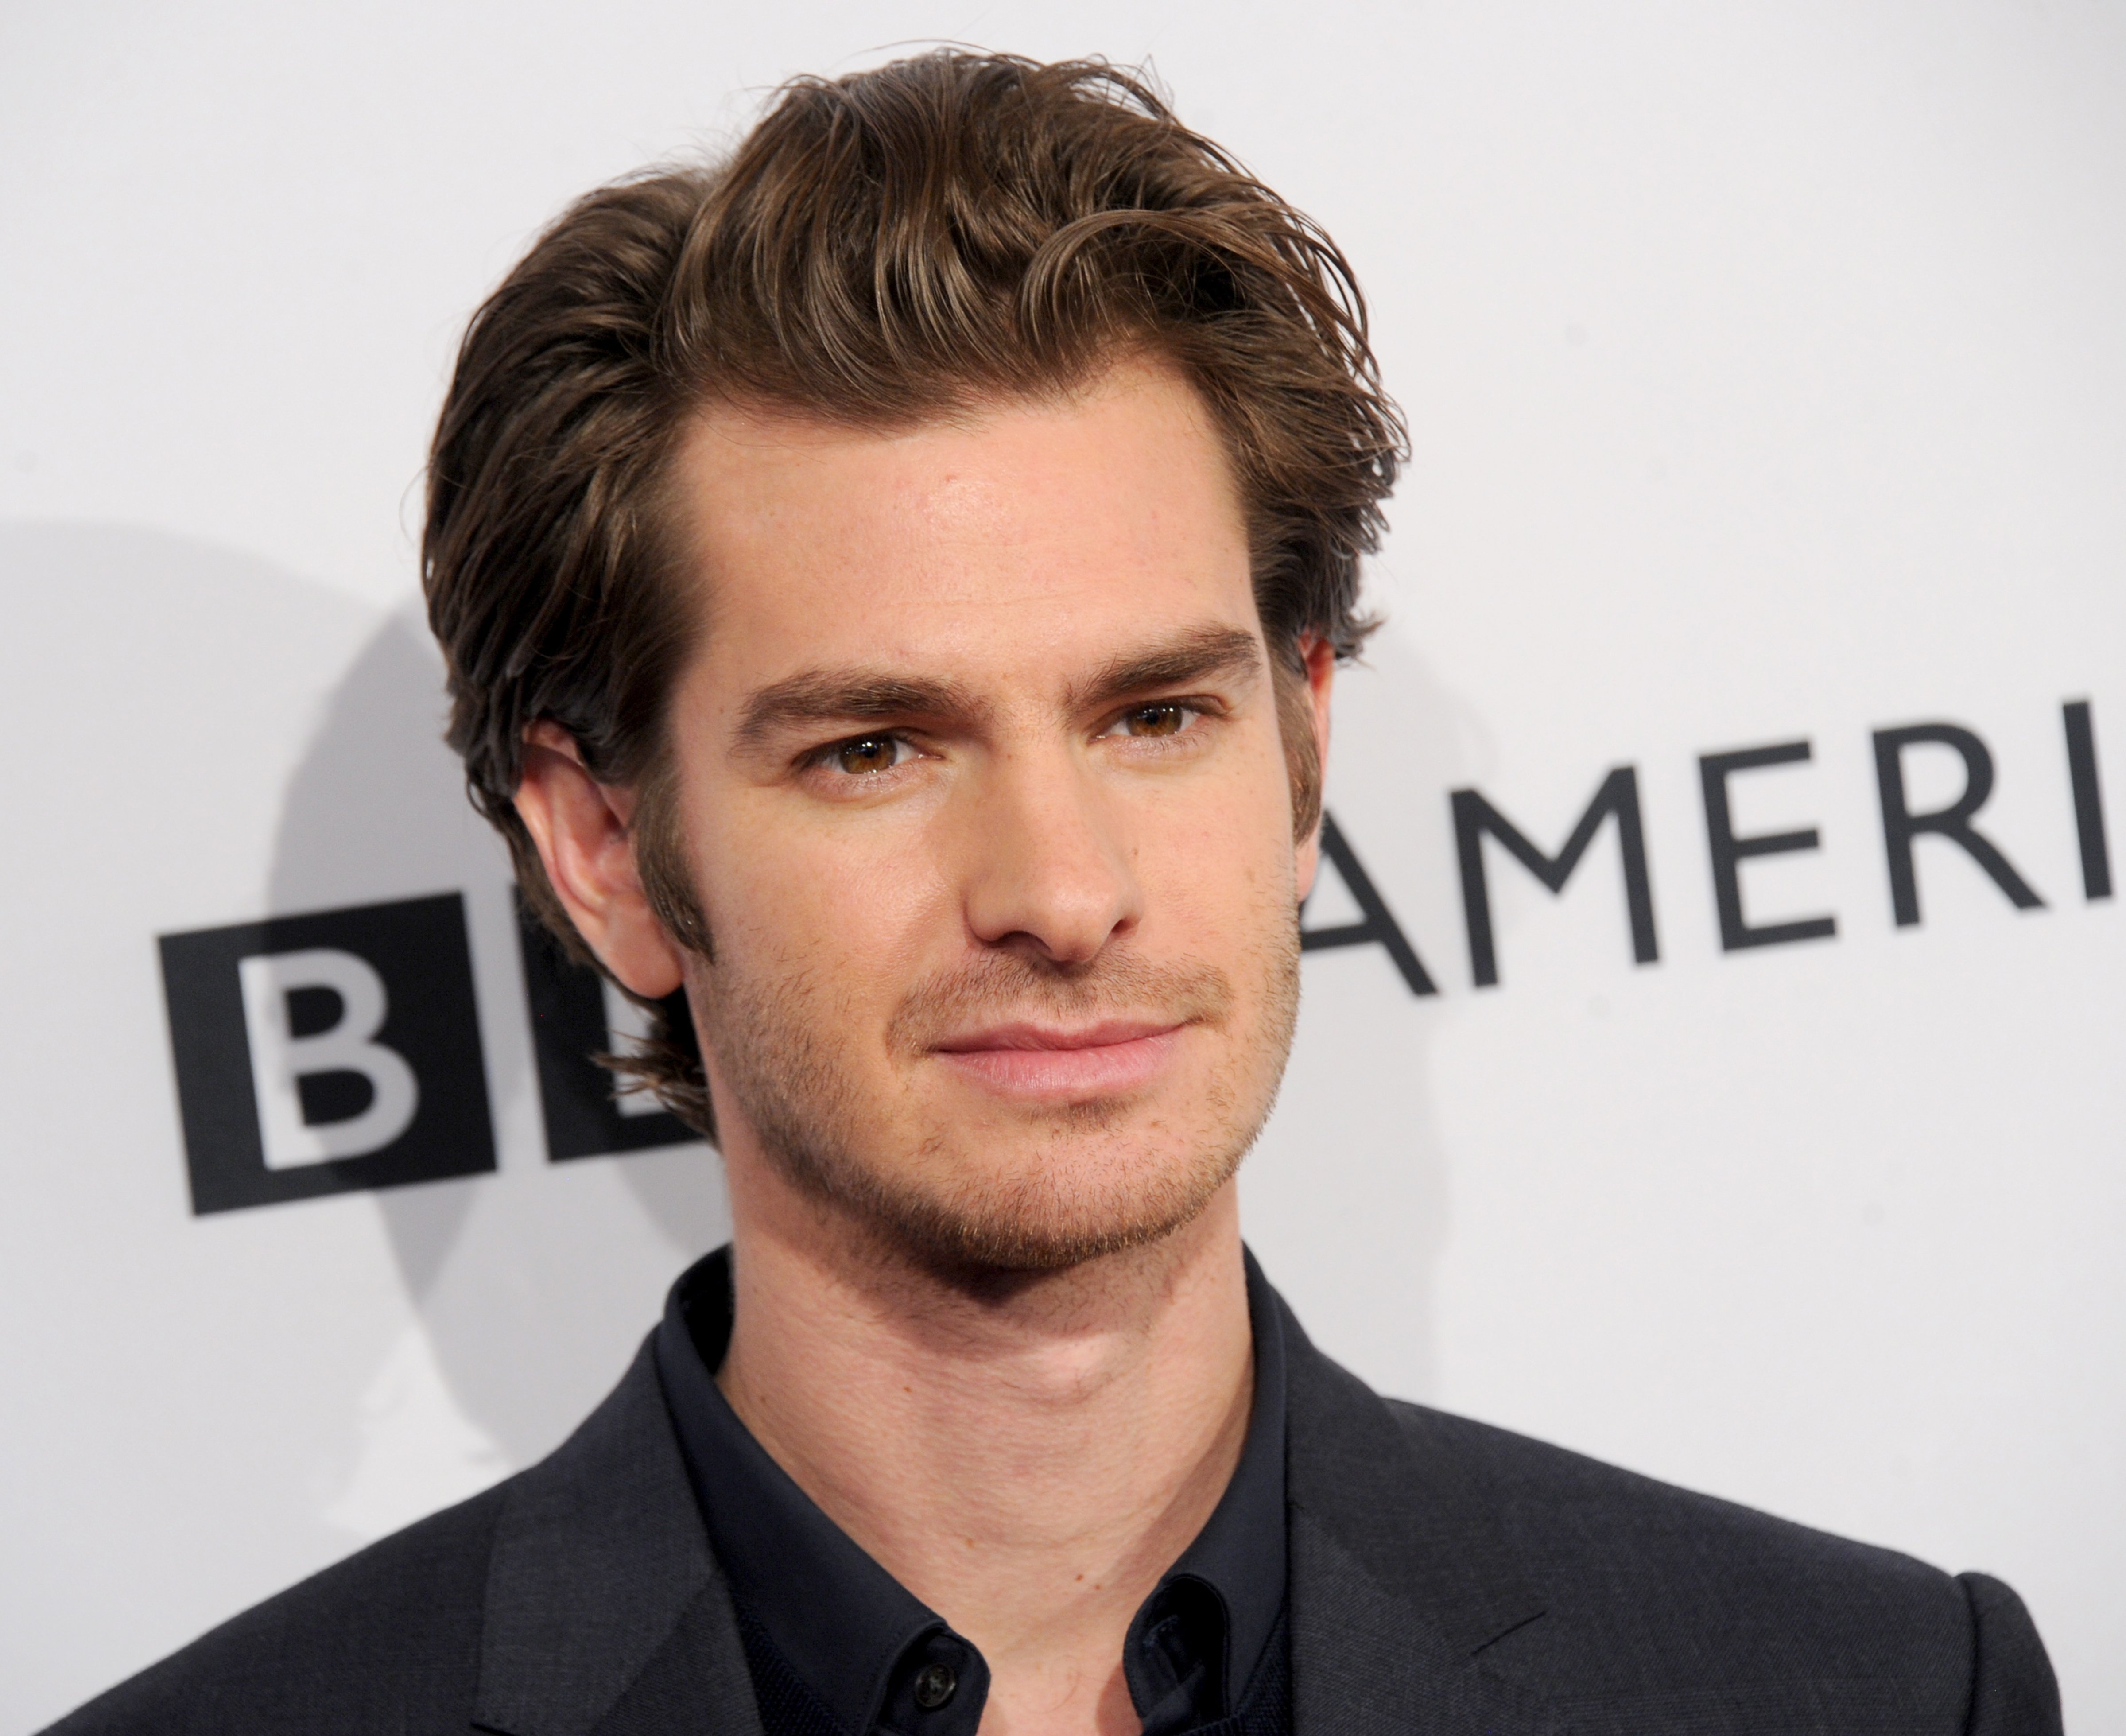 Andrew Garfield arrives at The BAFTA Tea Party at Four Seasons Hotel Los Angeles at Beverly Hills on Jan. 7, 2017 in Los Angeles, California. (Gregg DeGuire—WireImage/Getty Images)